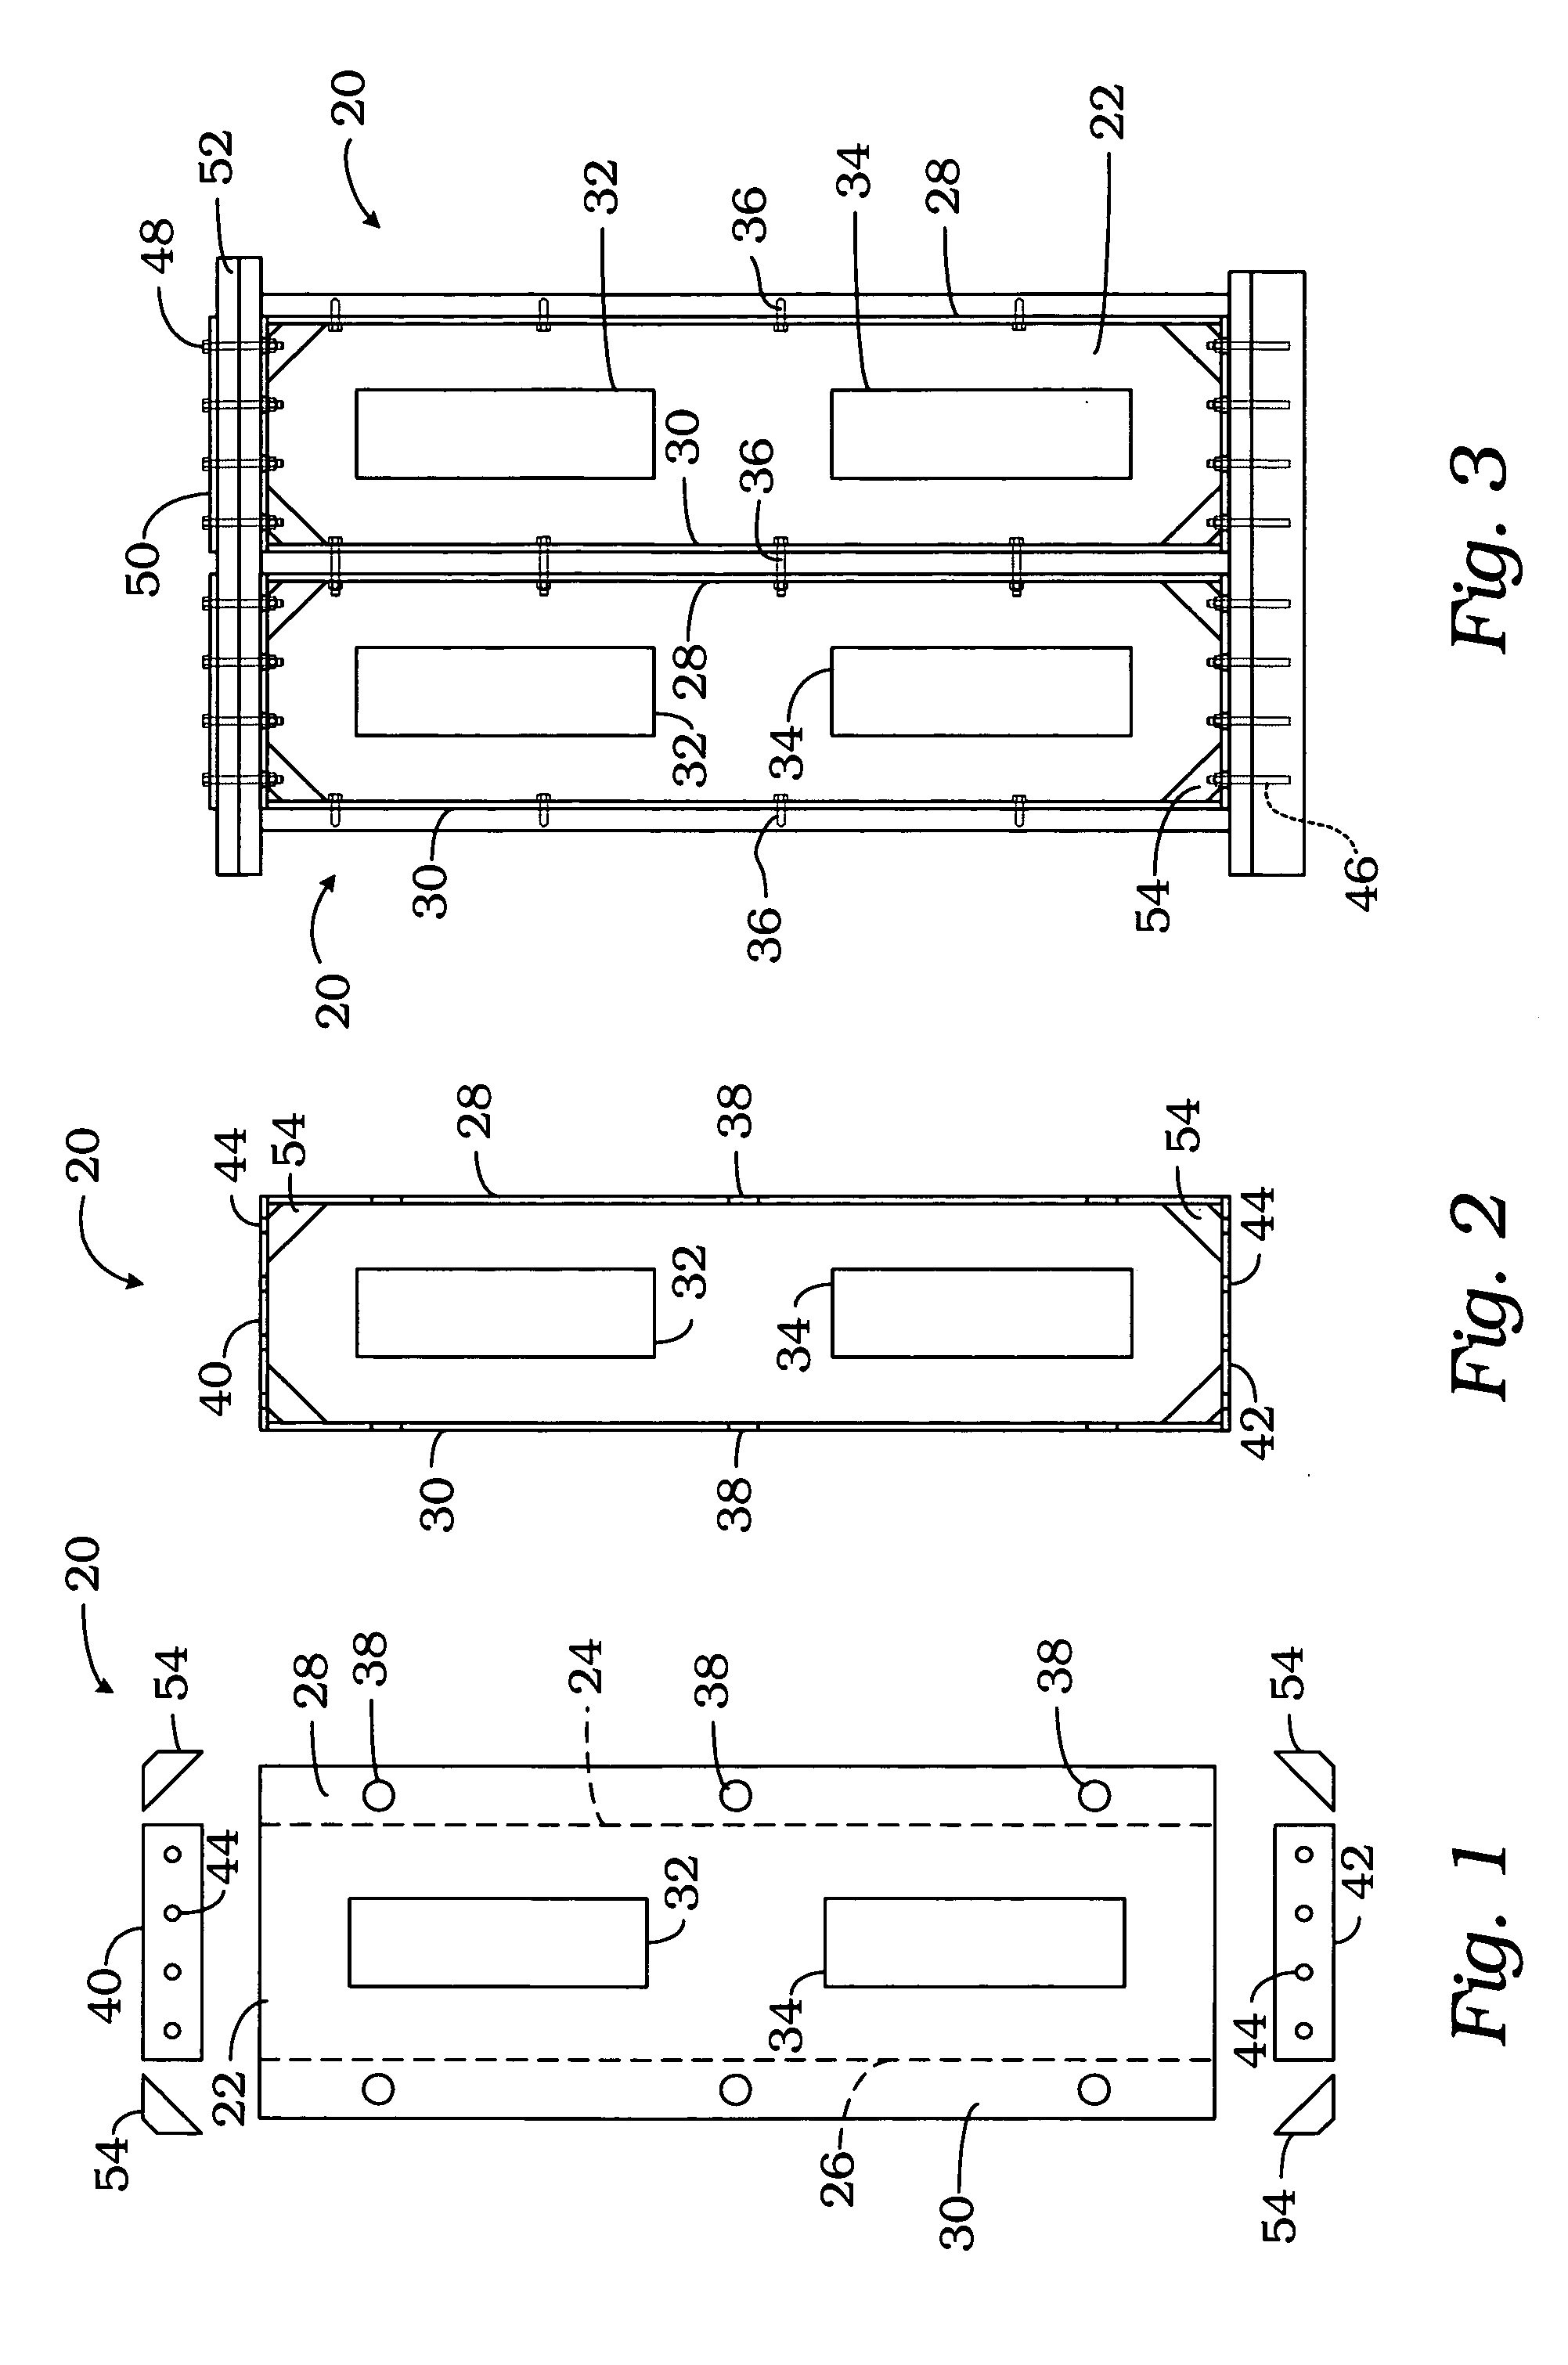 Structural reinforcing system components